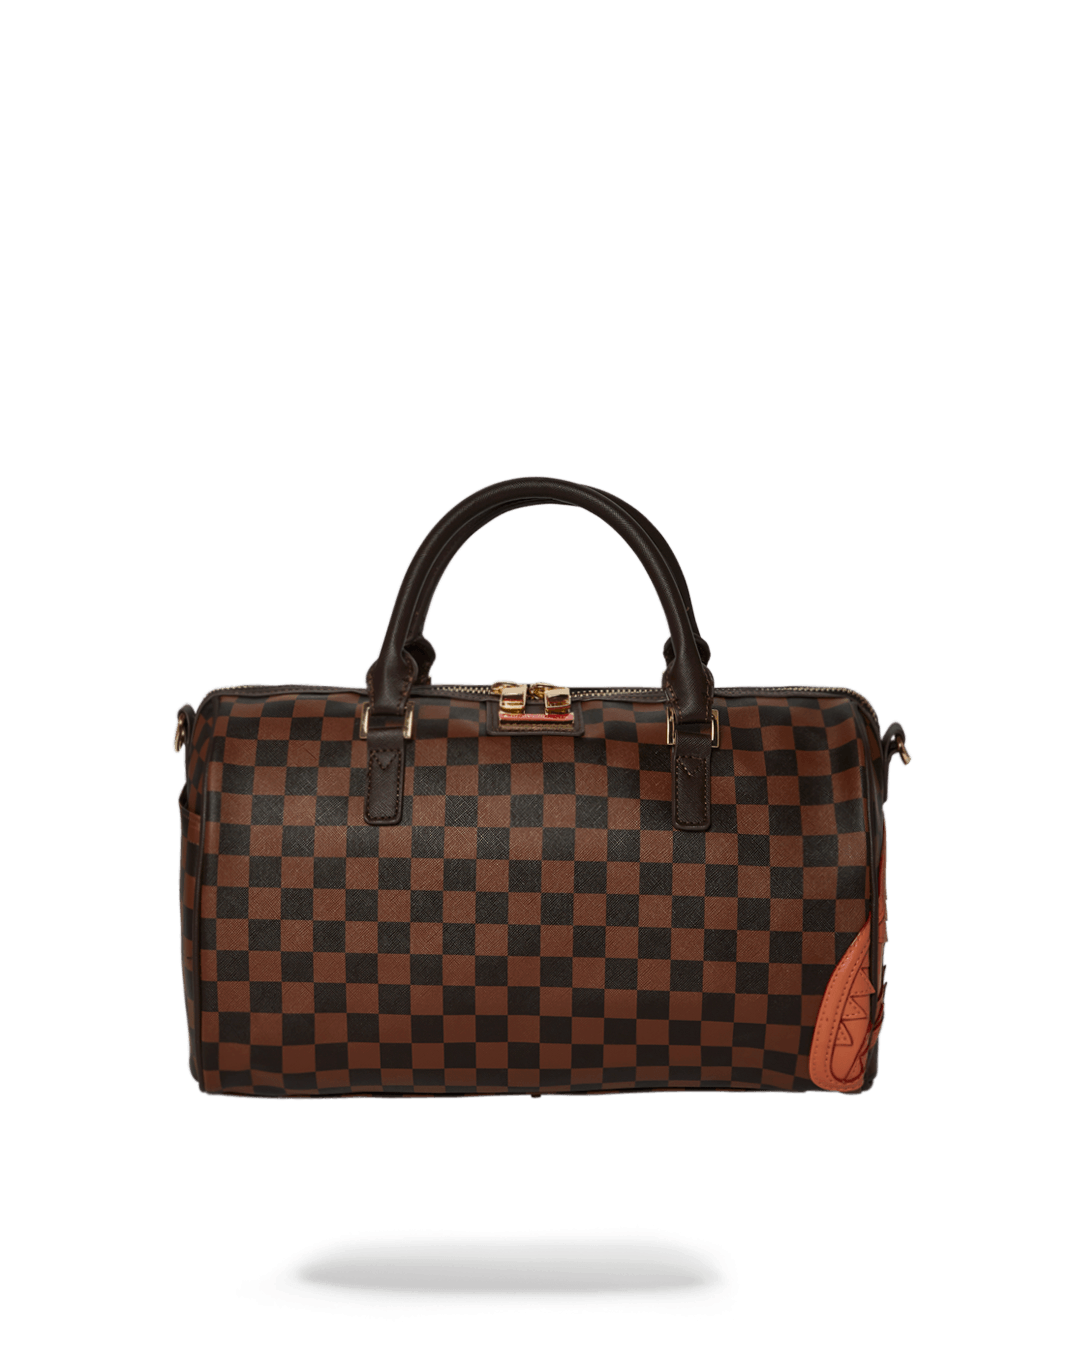 HENNY MINI DUFFLE - HIGH QUALITY AND INEXPENSIVE - HENNY MINI DUFFLE HIGH QUALITY AND INEXPENSIVE-31